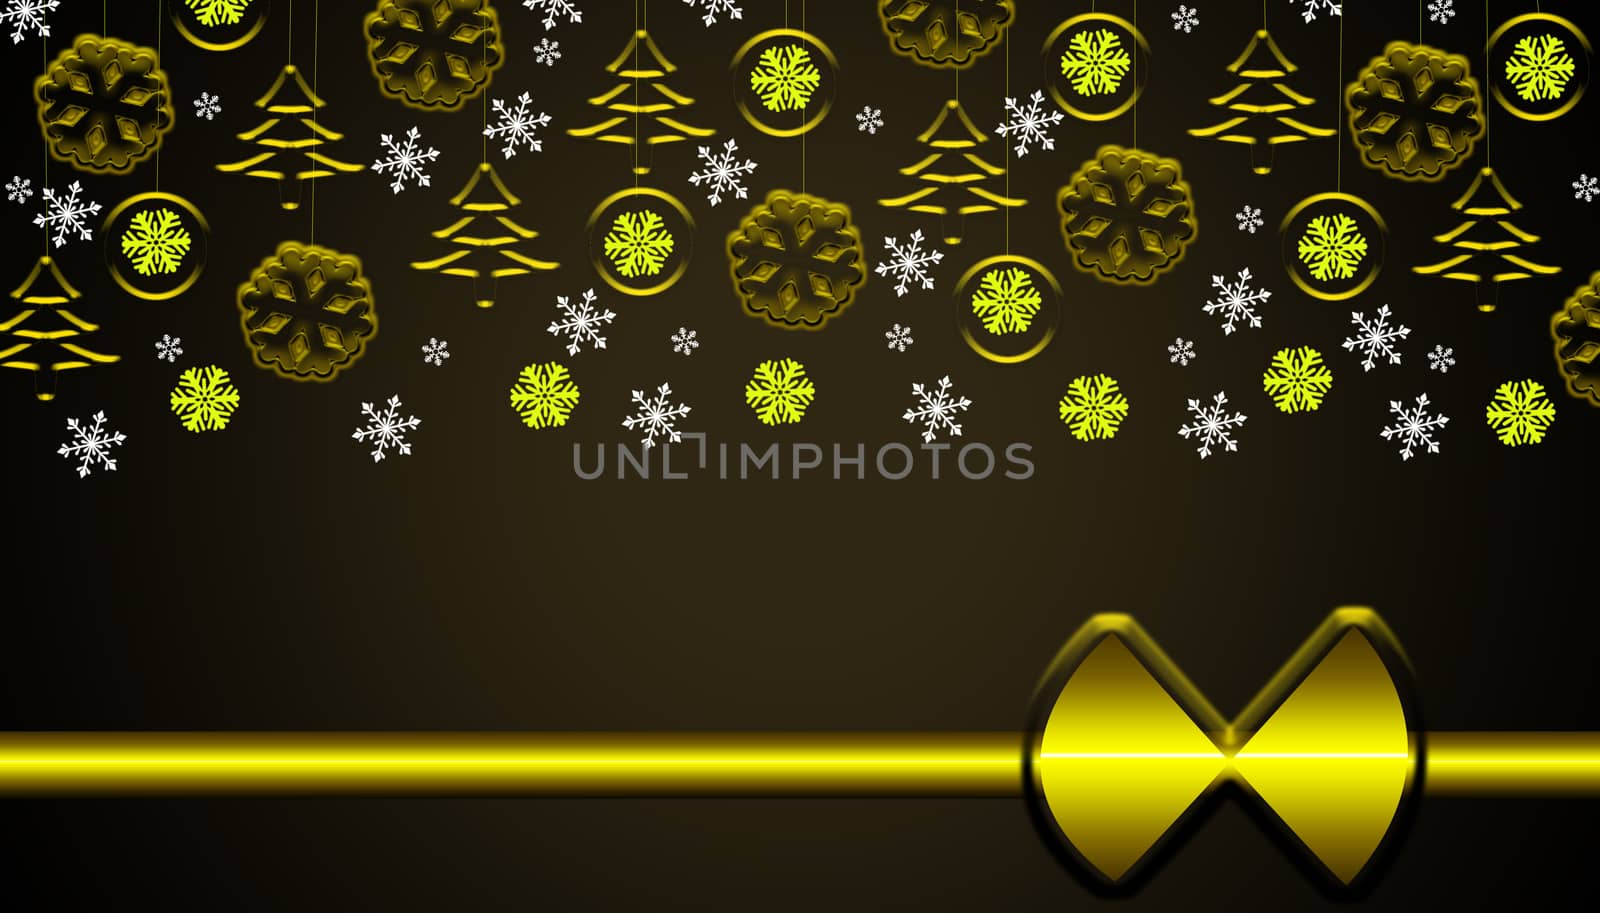 Brown christmas background with golden hanging ornaments and snowflakes gift looking by negmardesign